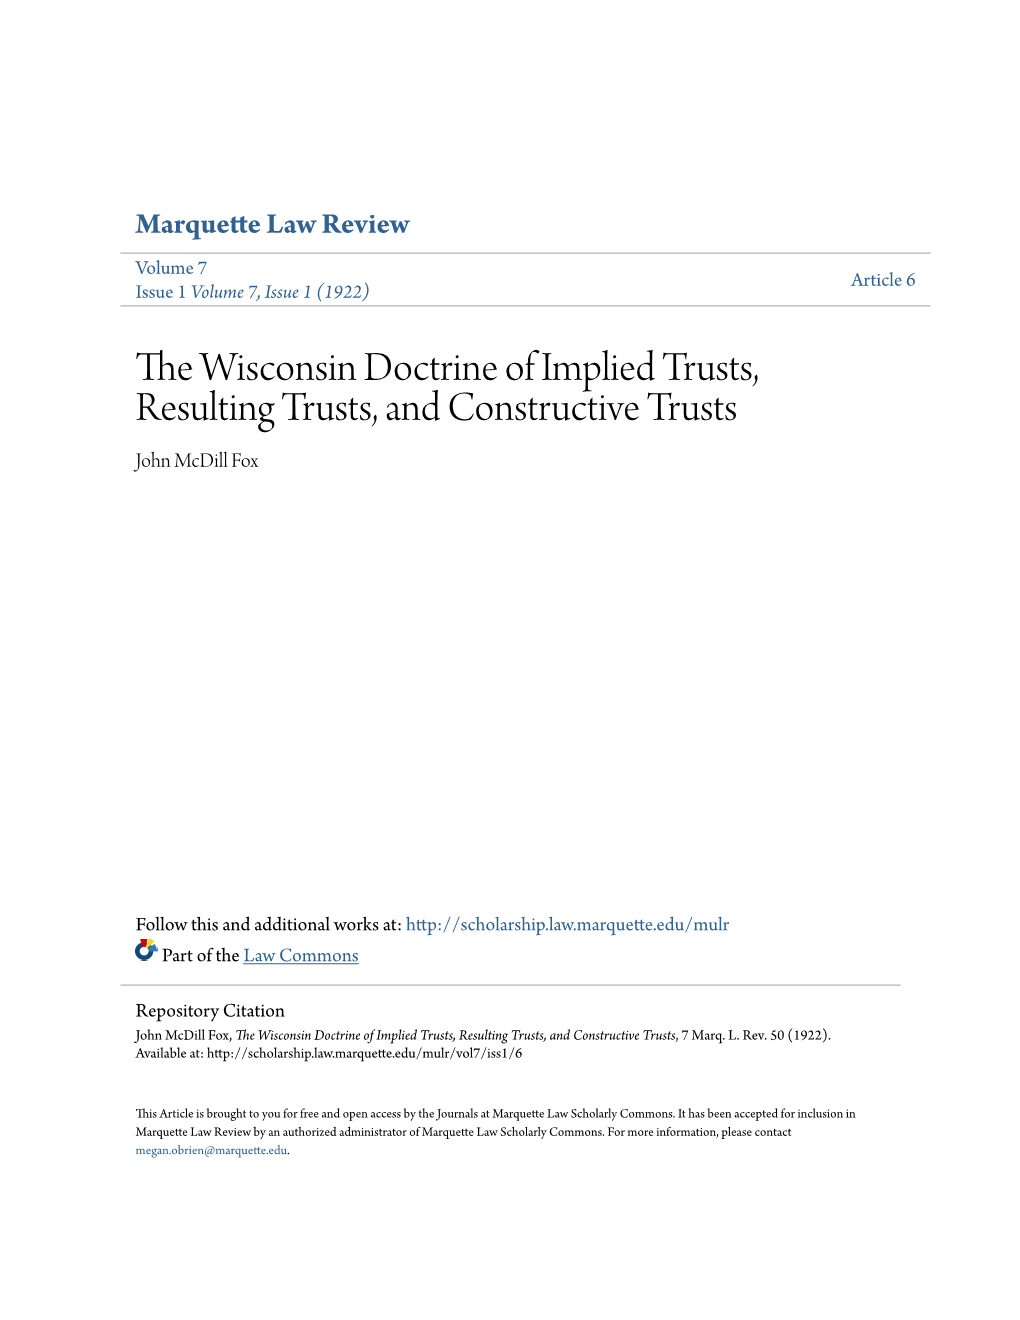 The Wisconsin Doctrine of Implied Trusts, Resulting Trusts, and Constructive Trusts, 7 Marq